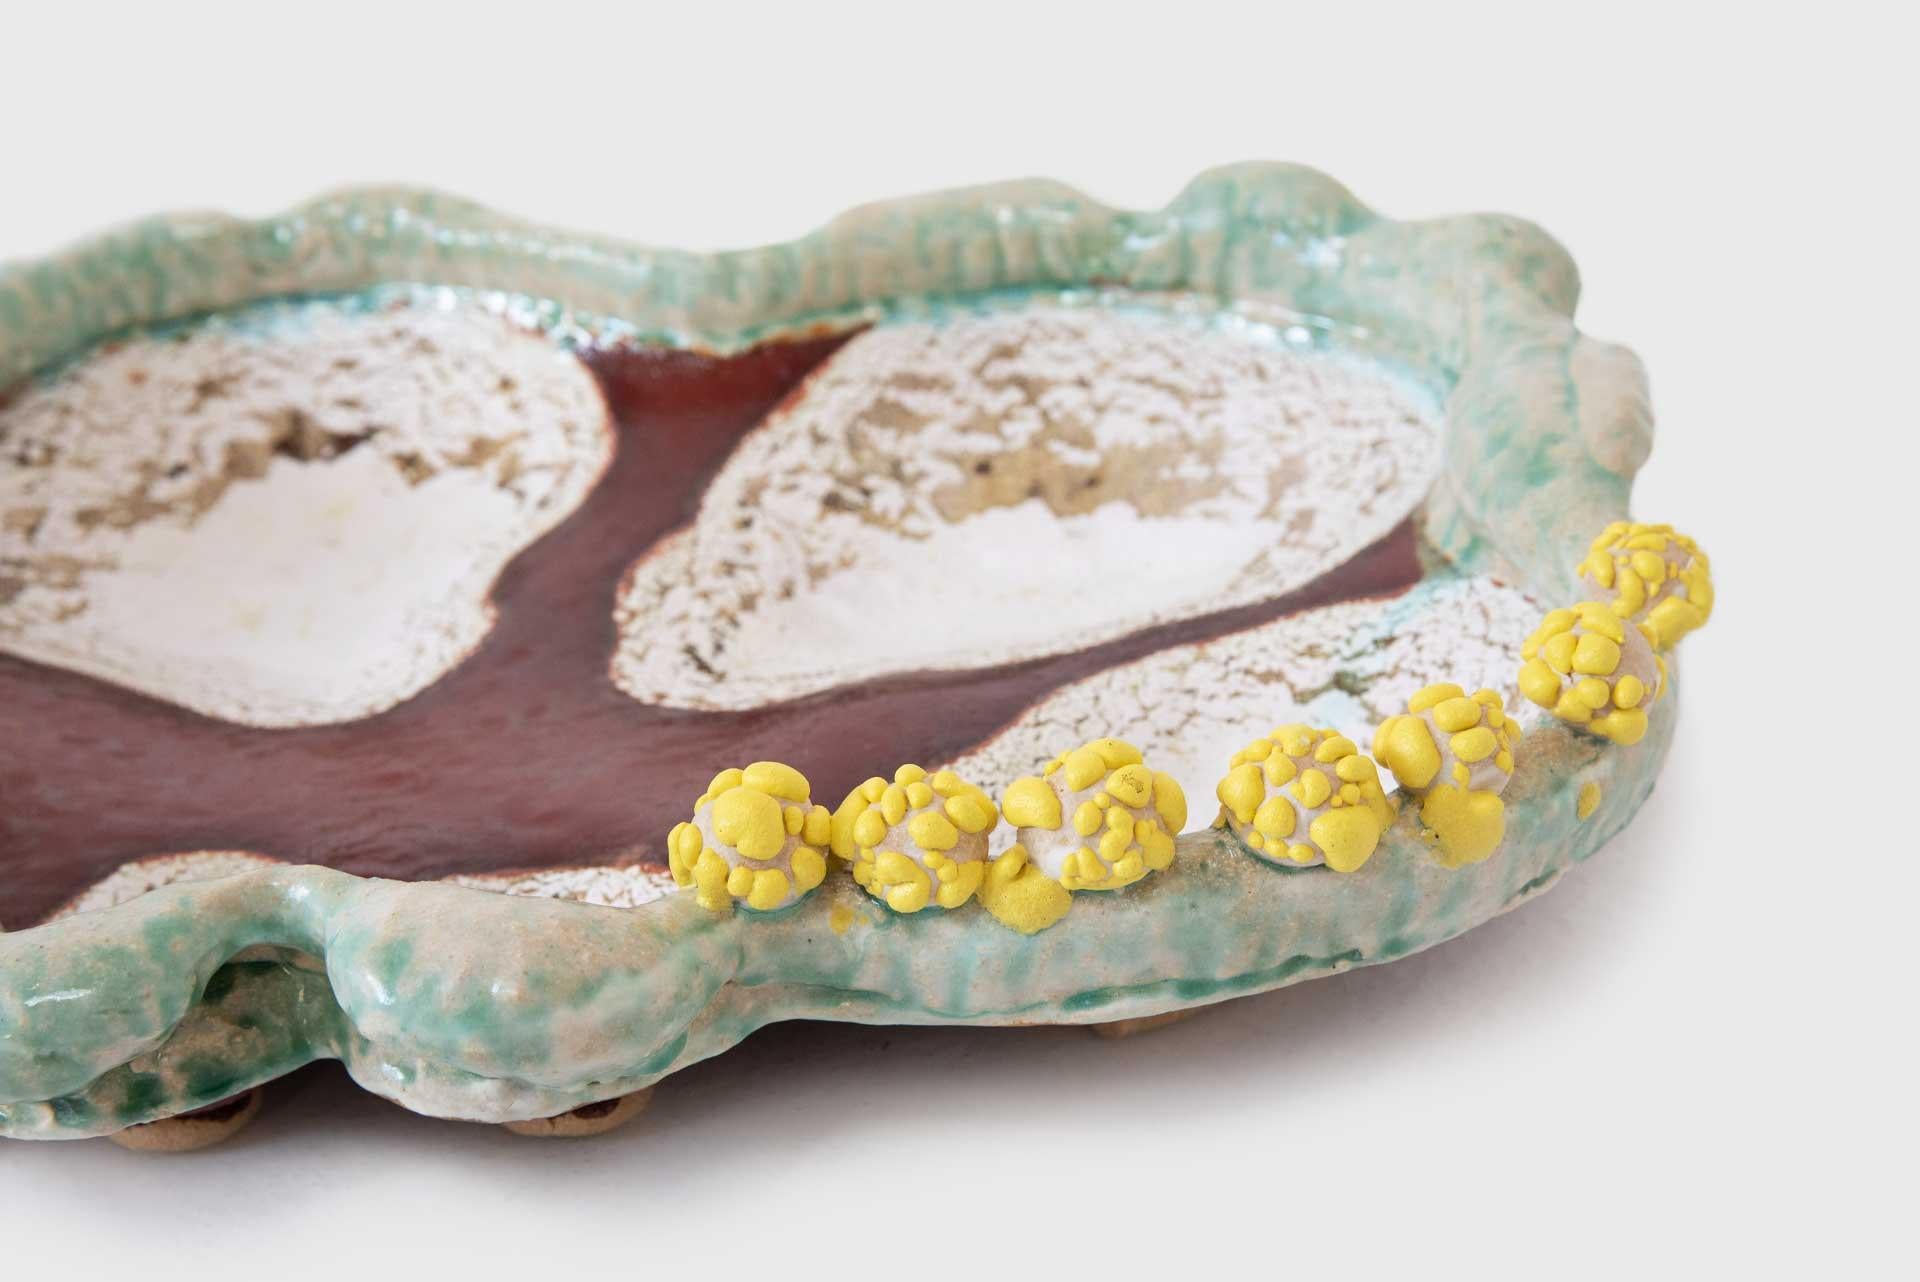 Tray model “Party Platter”
Manufactured by Nick Weddell
Produced in exclusive for Side Gallery
New York City, 2022
Stoneware and glaze

Nicholas Weddell wakes up one morning from uneasy dreams to find his vessels transformed into enormous